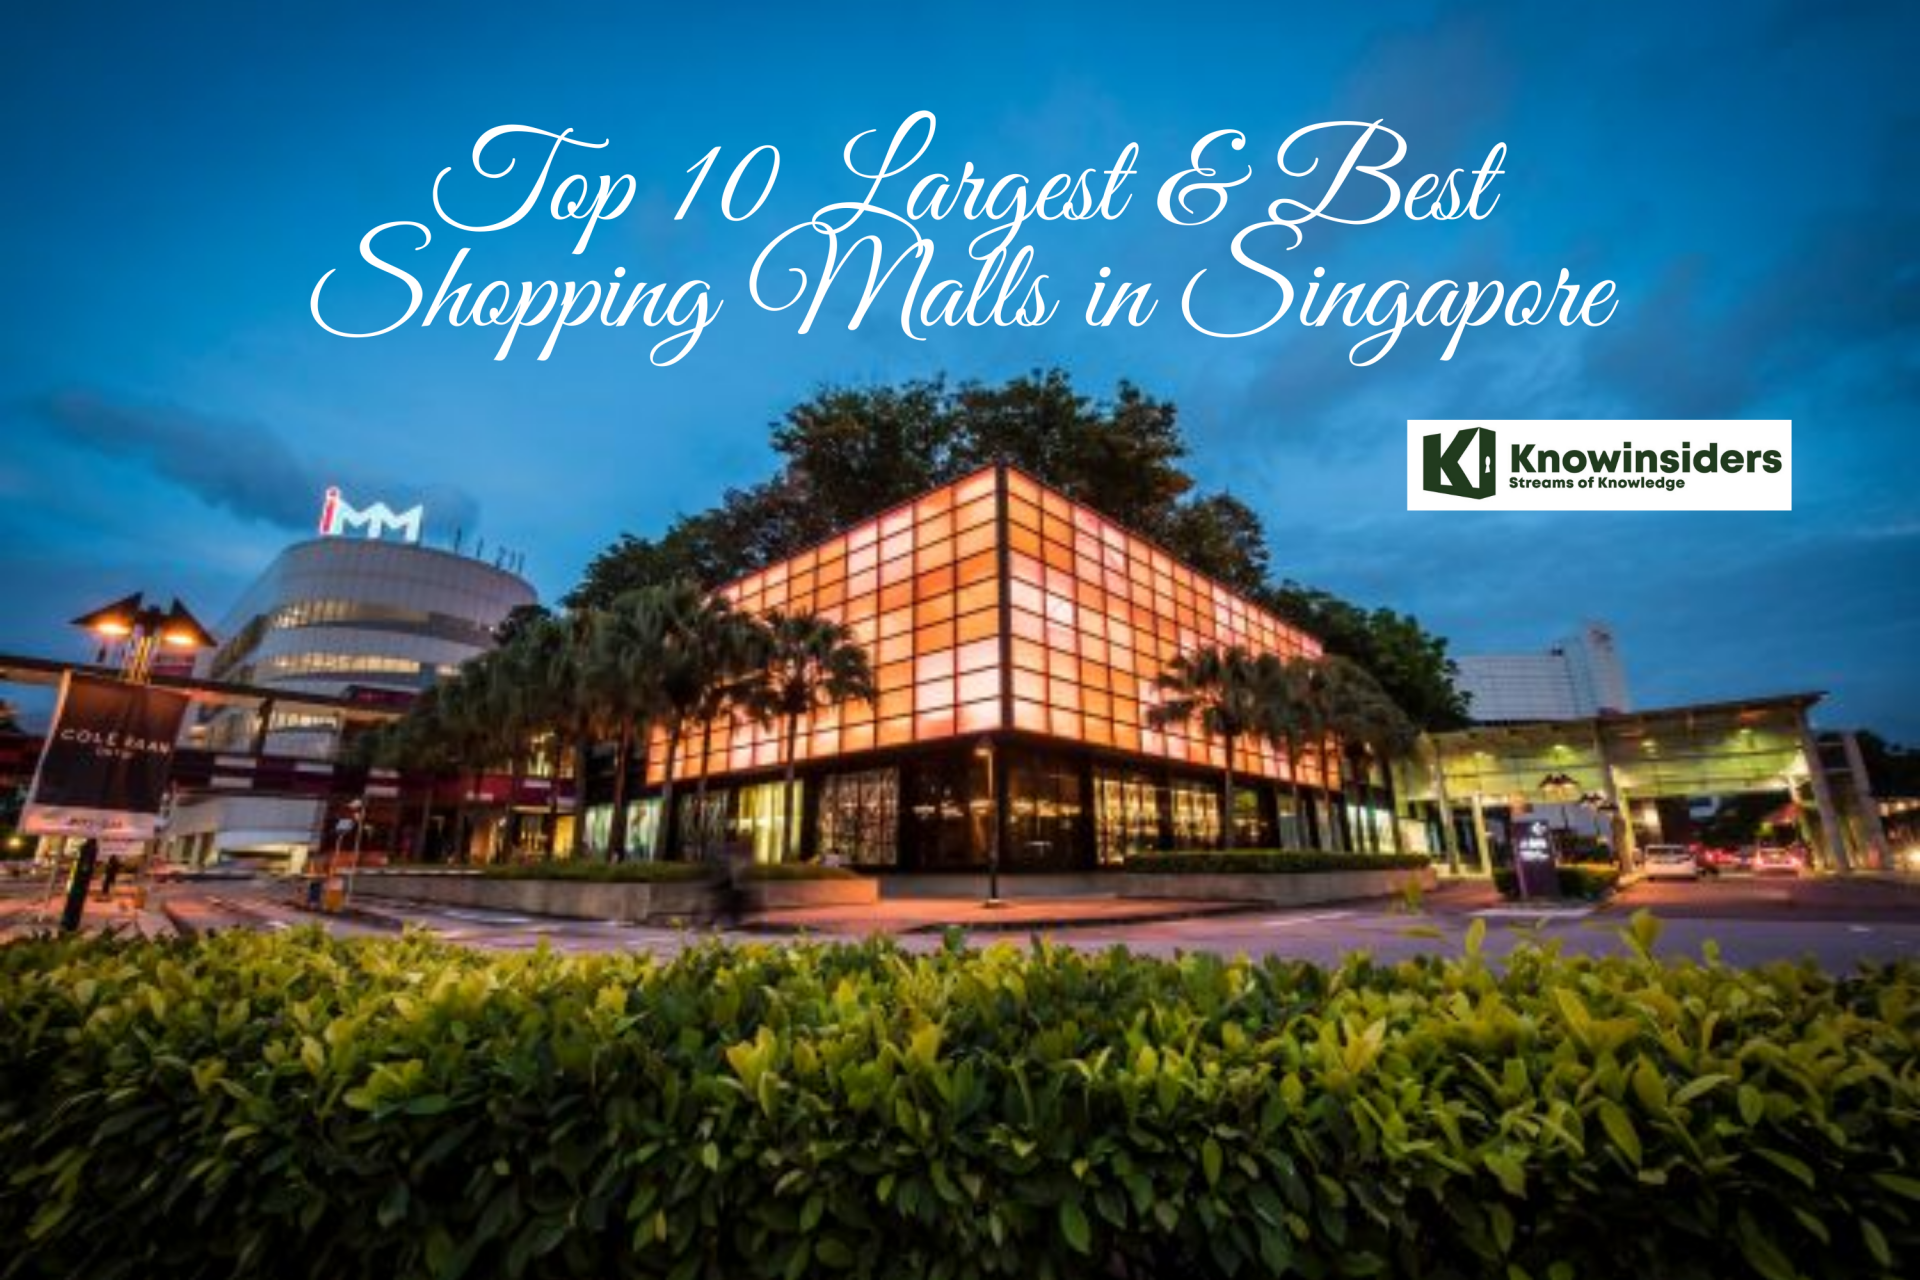 10 Biggest & Best Shopping Malls in Singapore